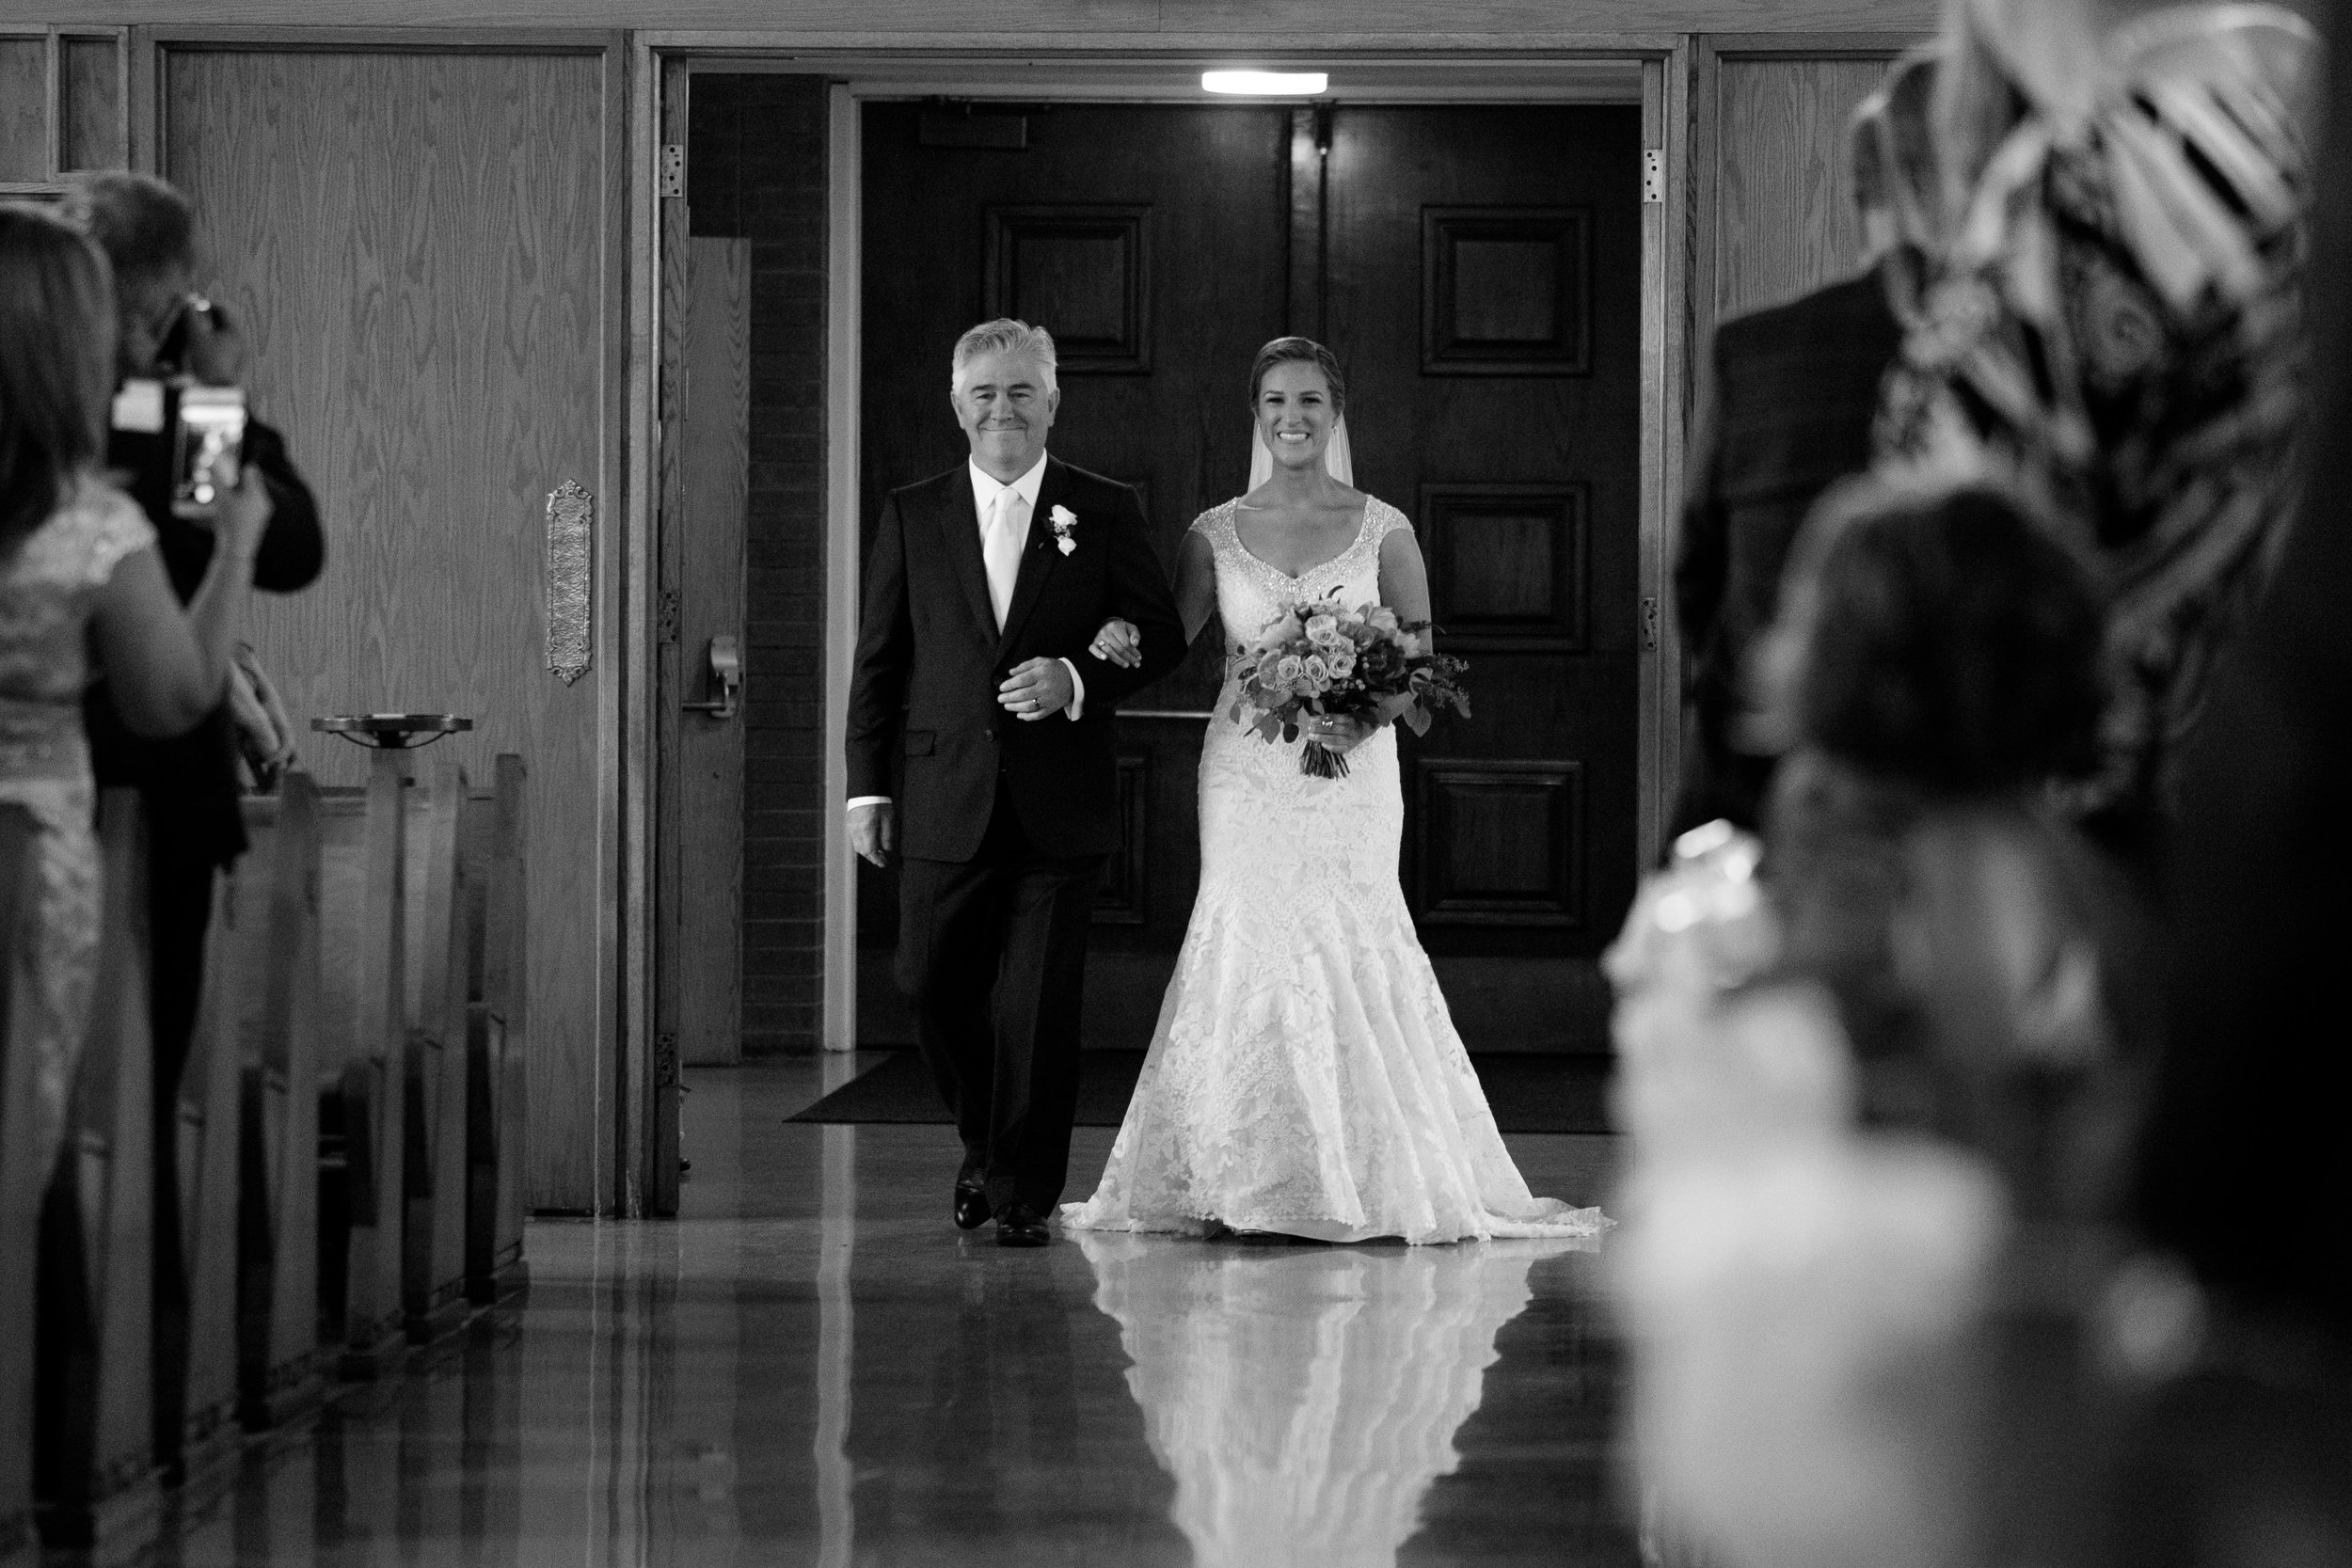  Sabrina and her dad walk down the aisle during her wedding ceremony in Toronto. 